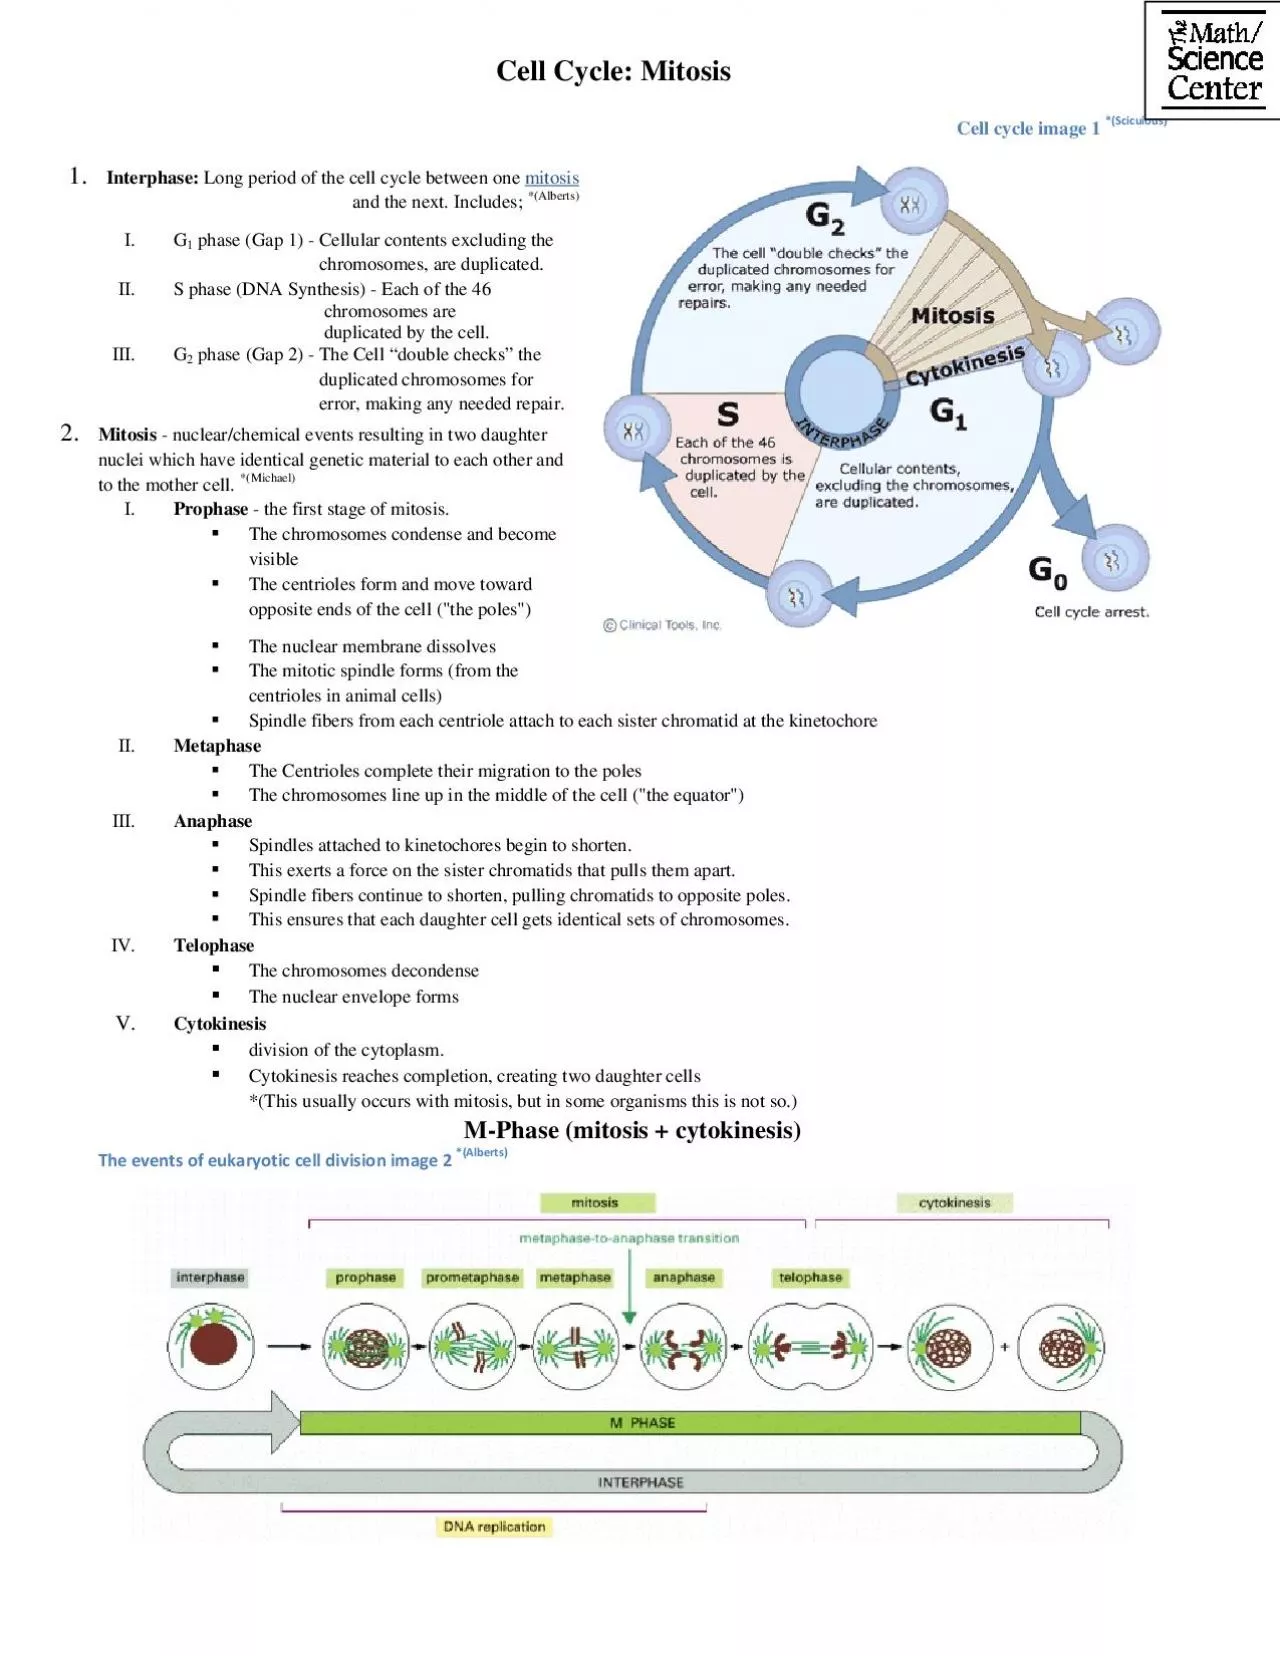 Cell cycle image 1 ScicuiousInterphase Long period of the cell cyc